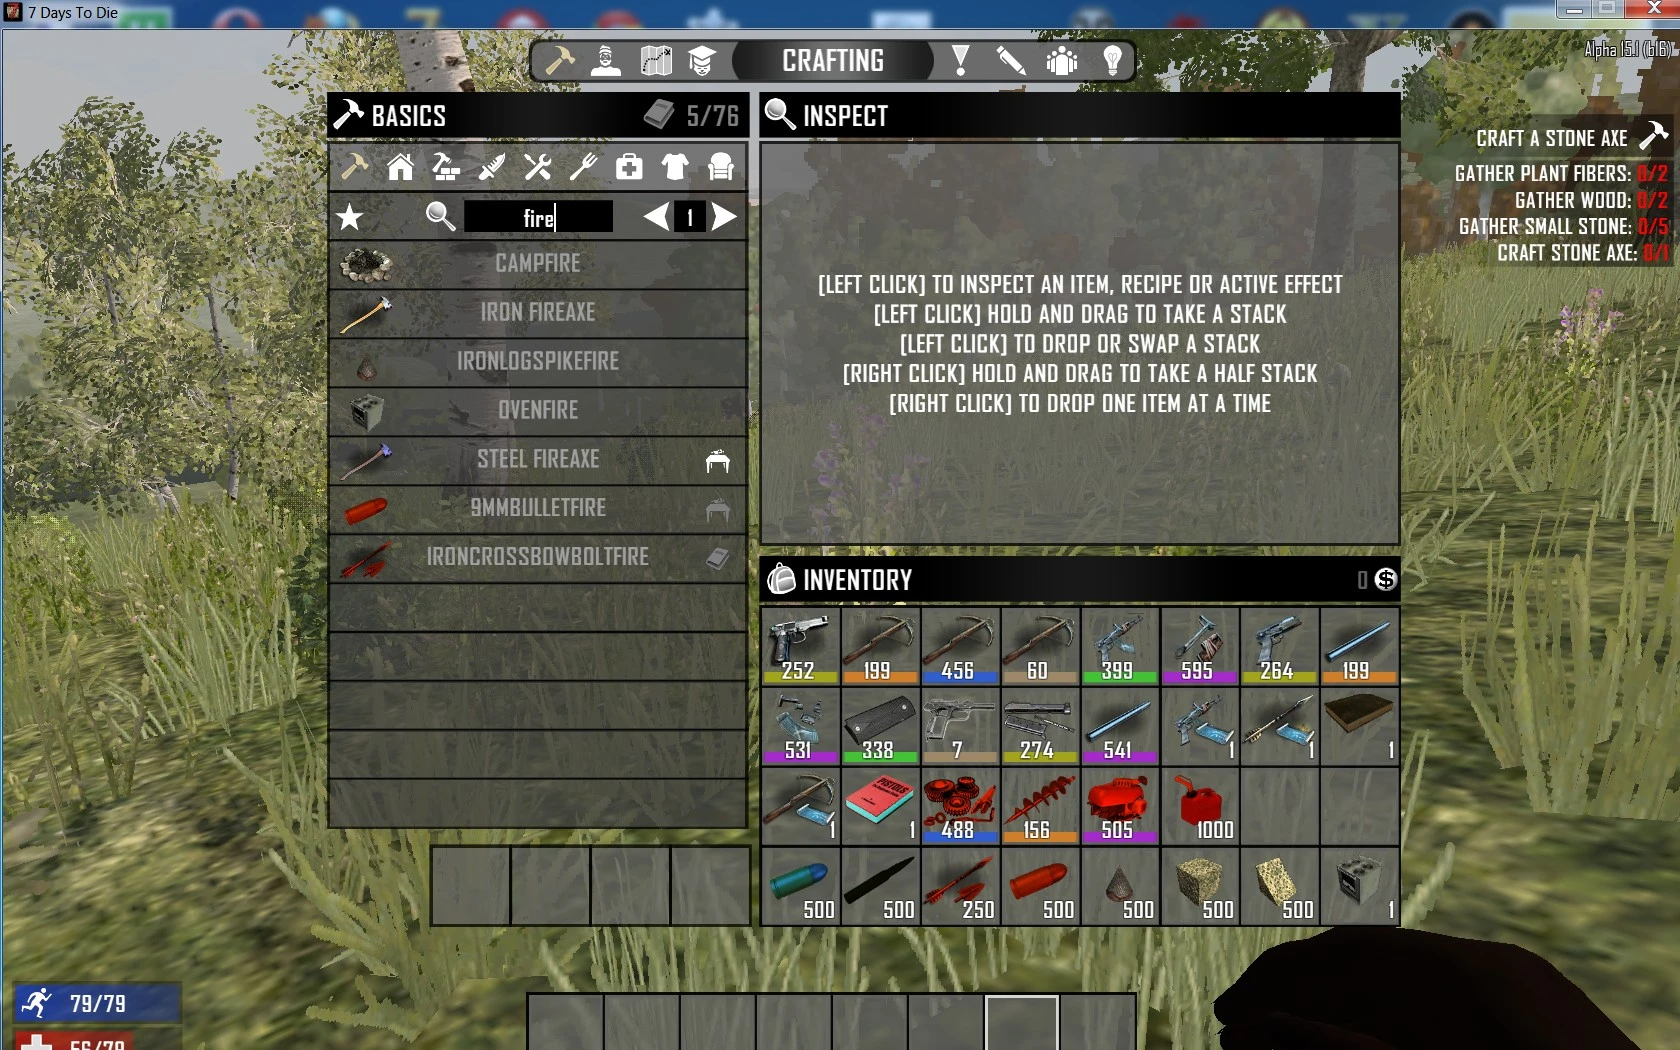 best place to go for 7 days to die mods